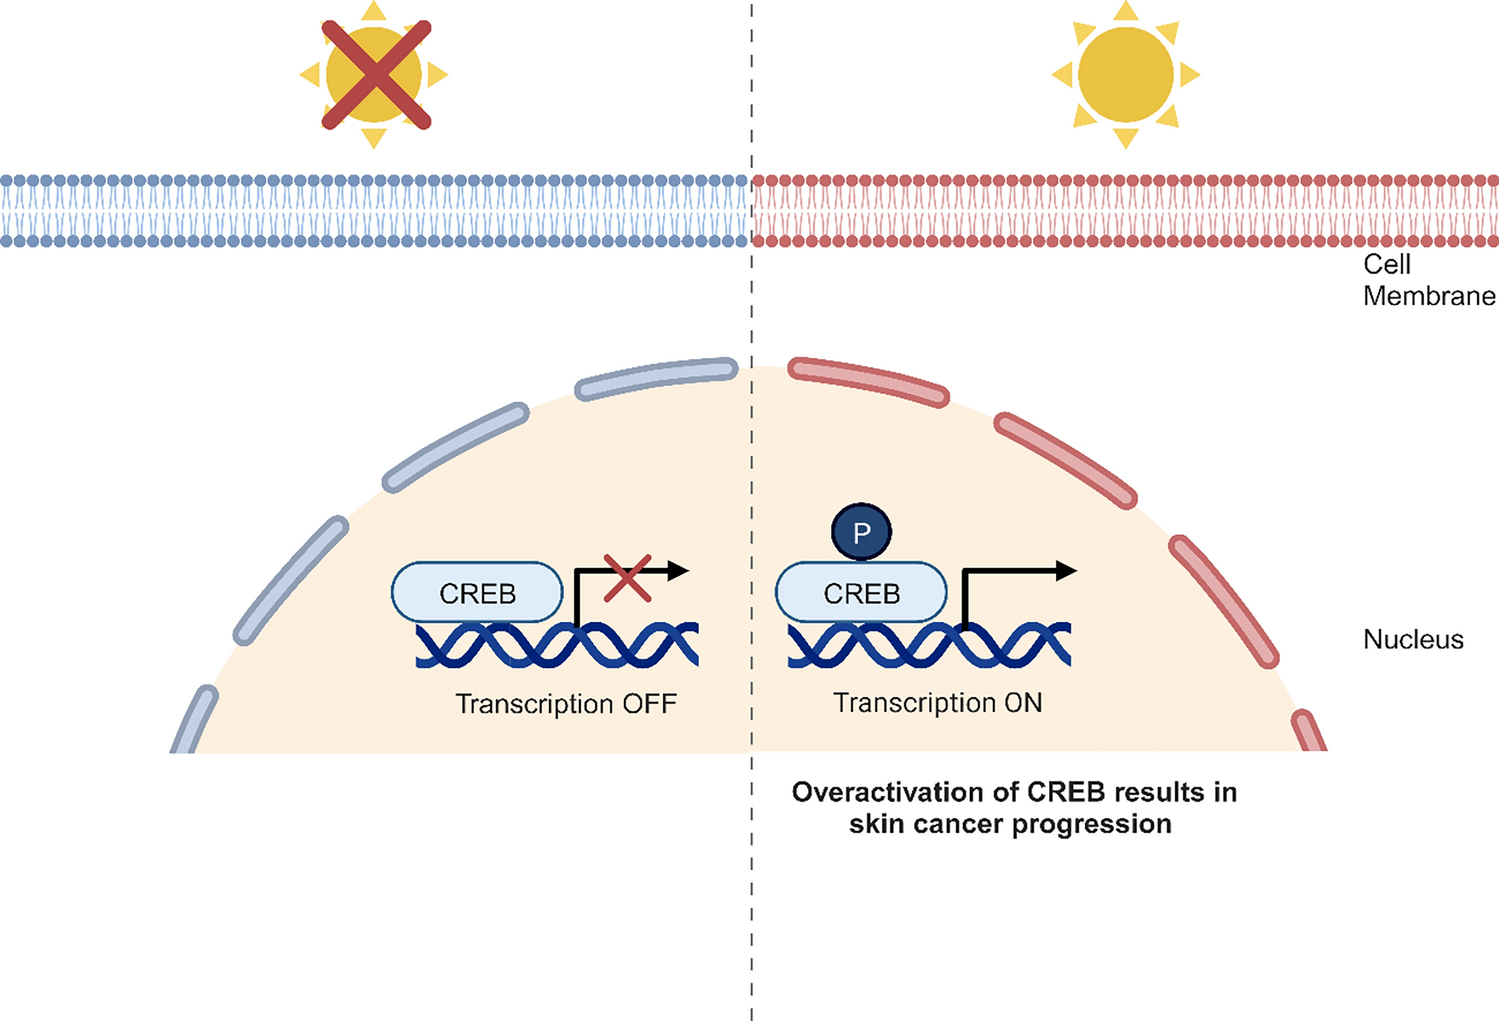 Cyclic AMP-regulatory element-binding protein: a novel UV-targeted transcription factor in skin cancer